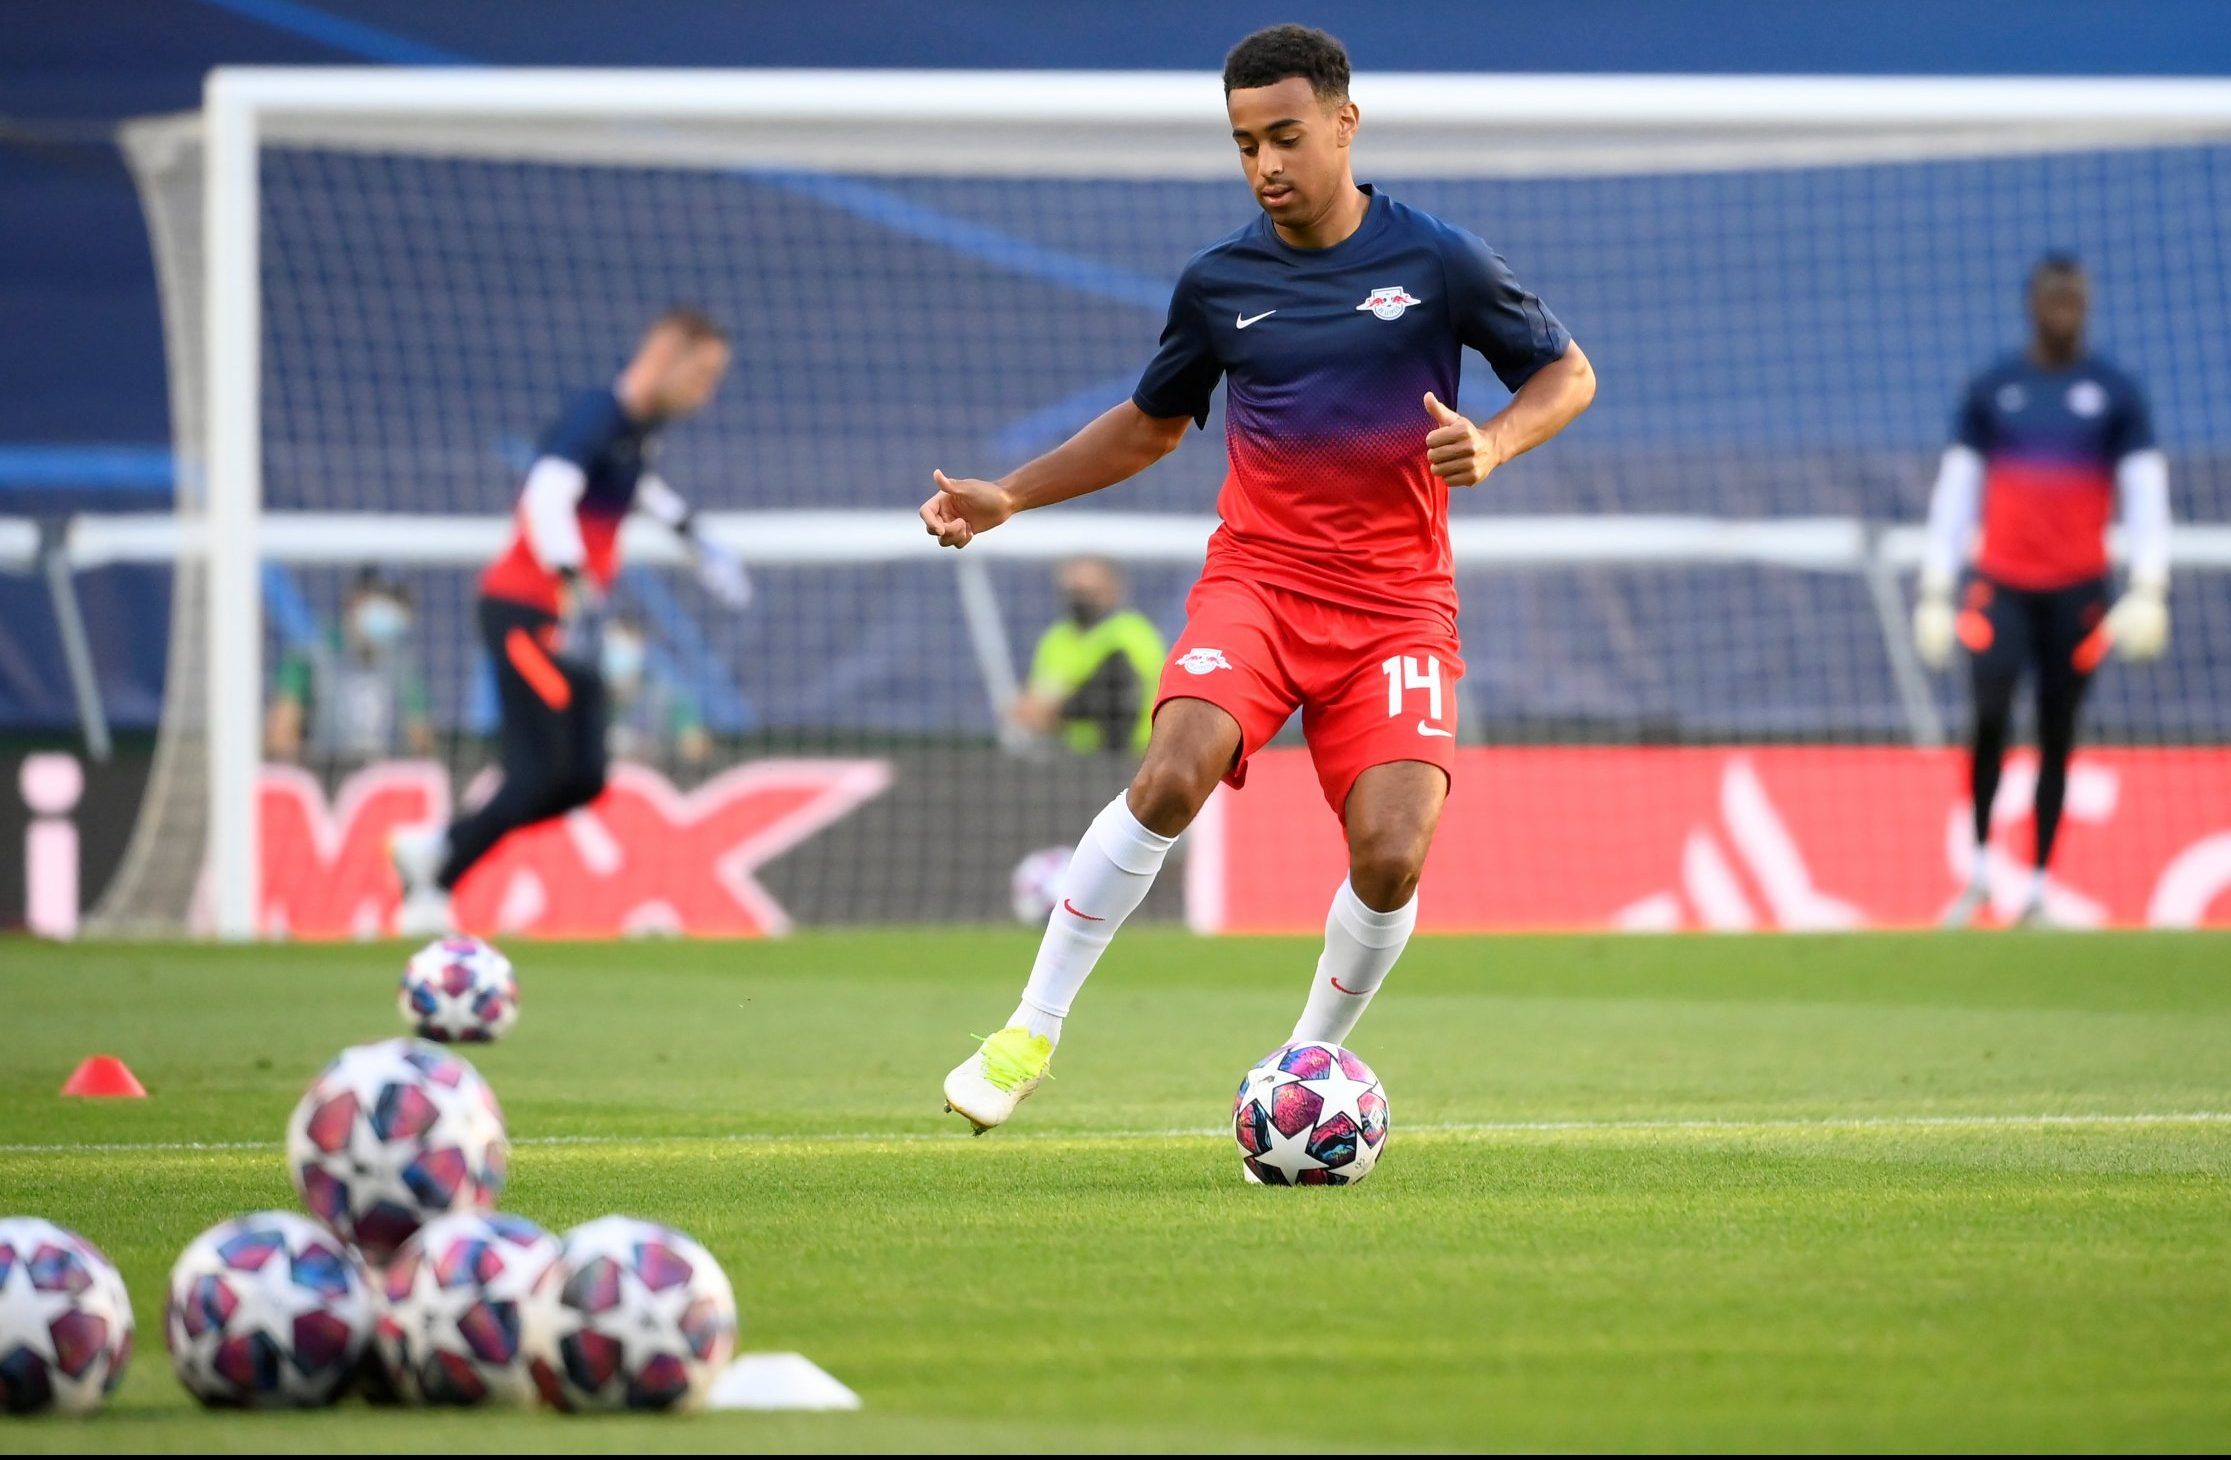 rb leipzig star tyler adams during warm up against atletico madrid champions league